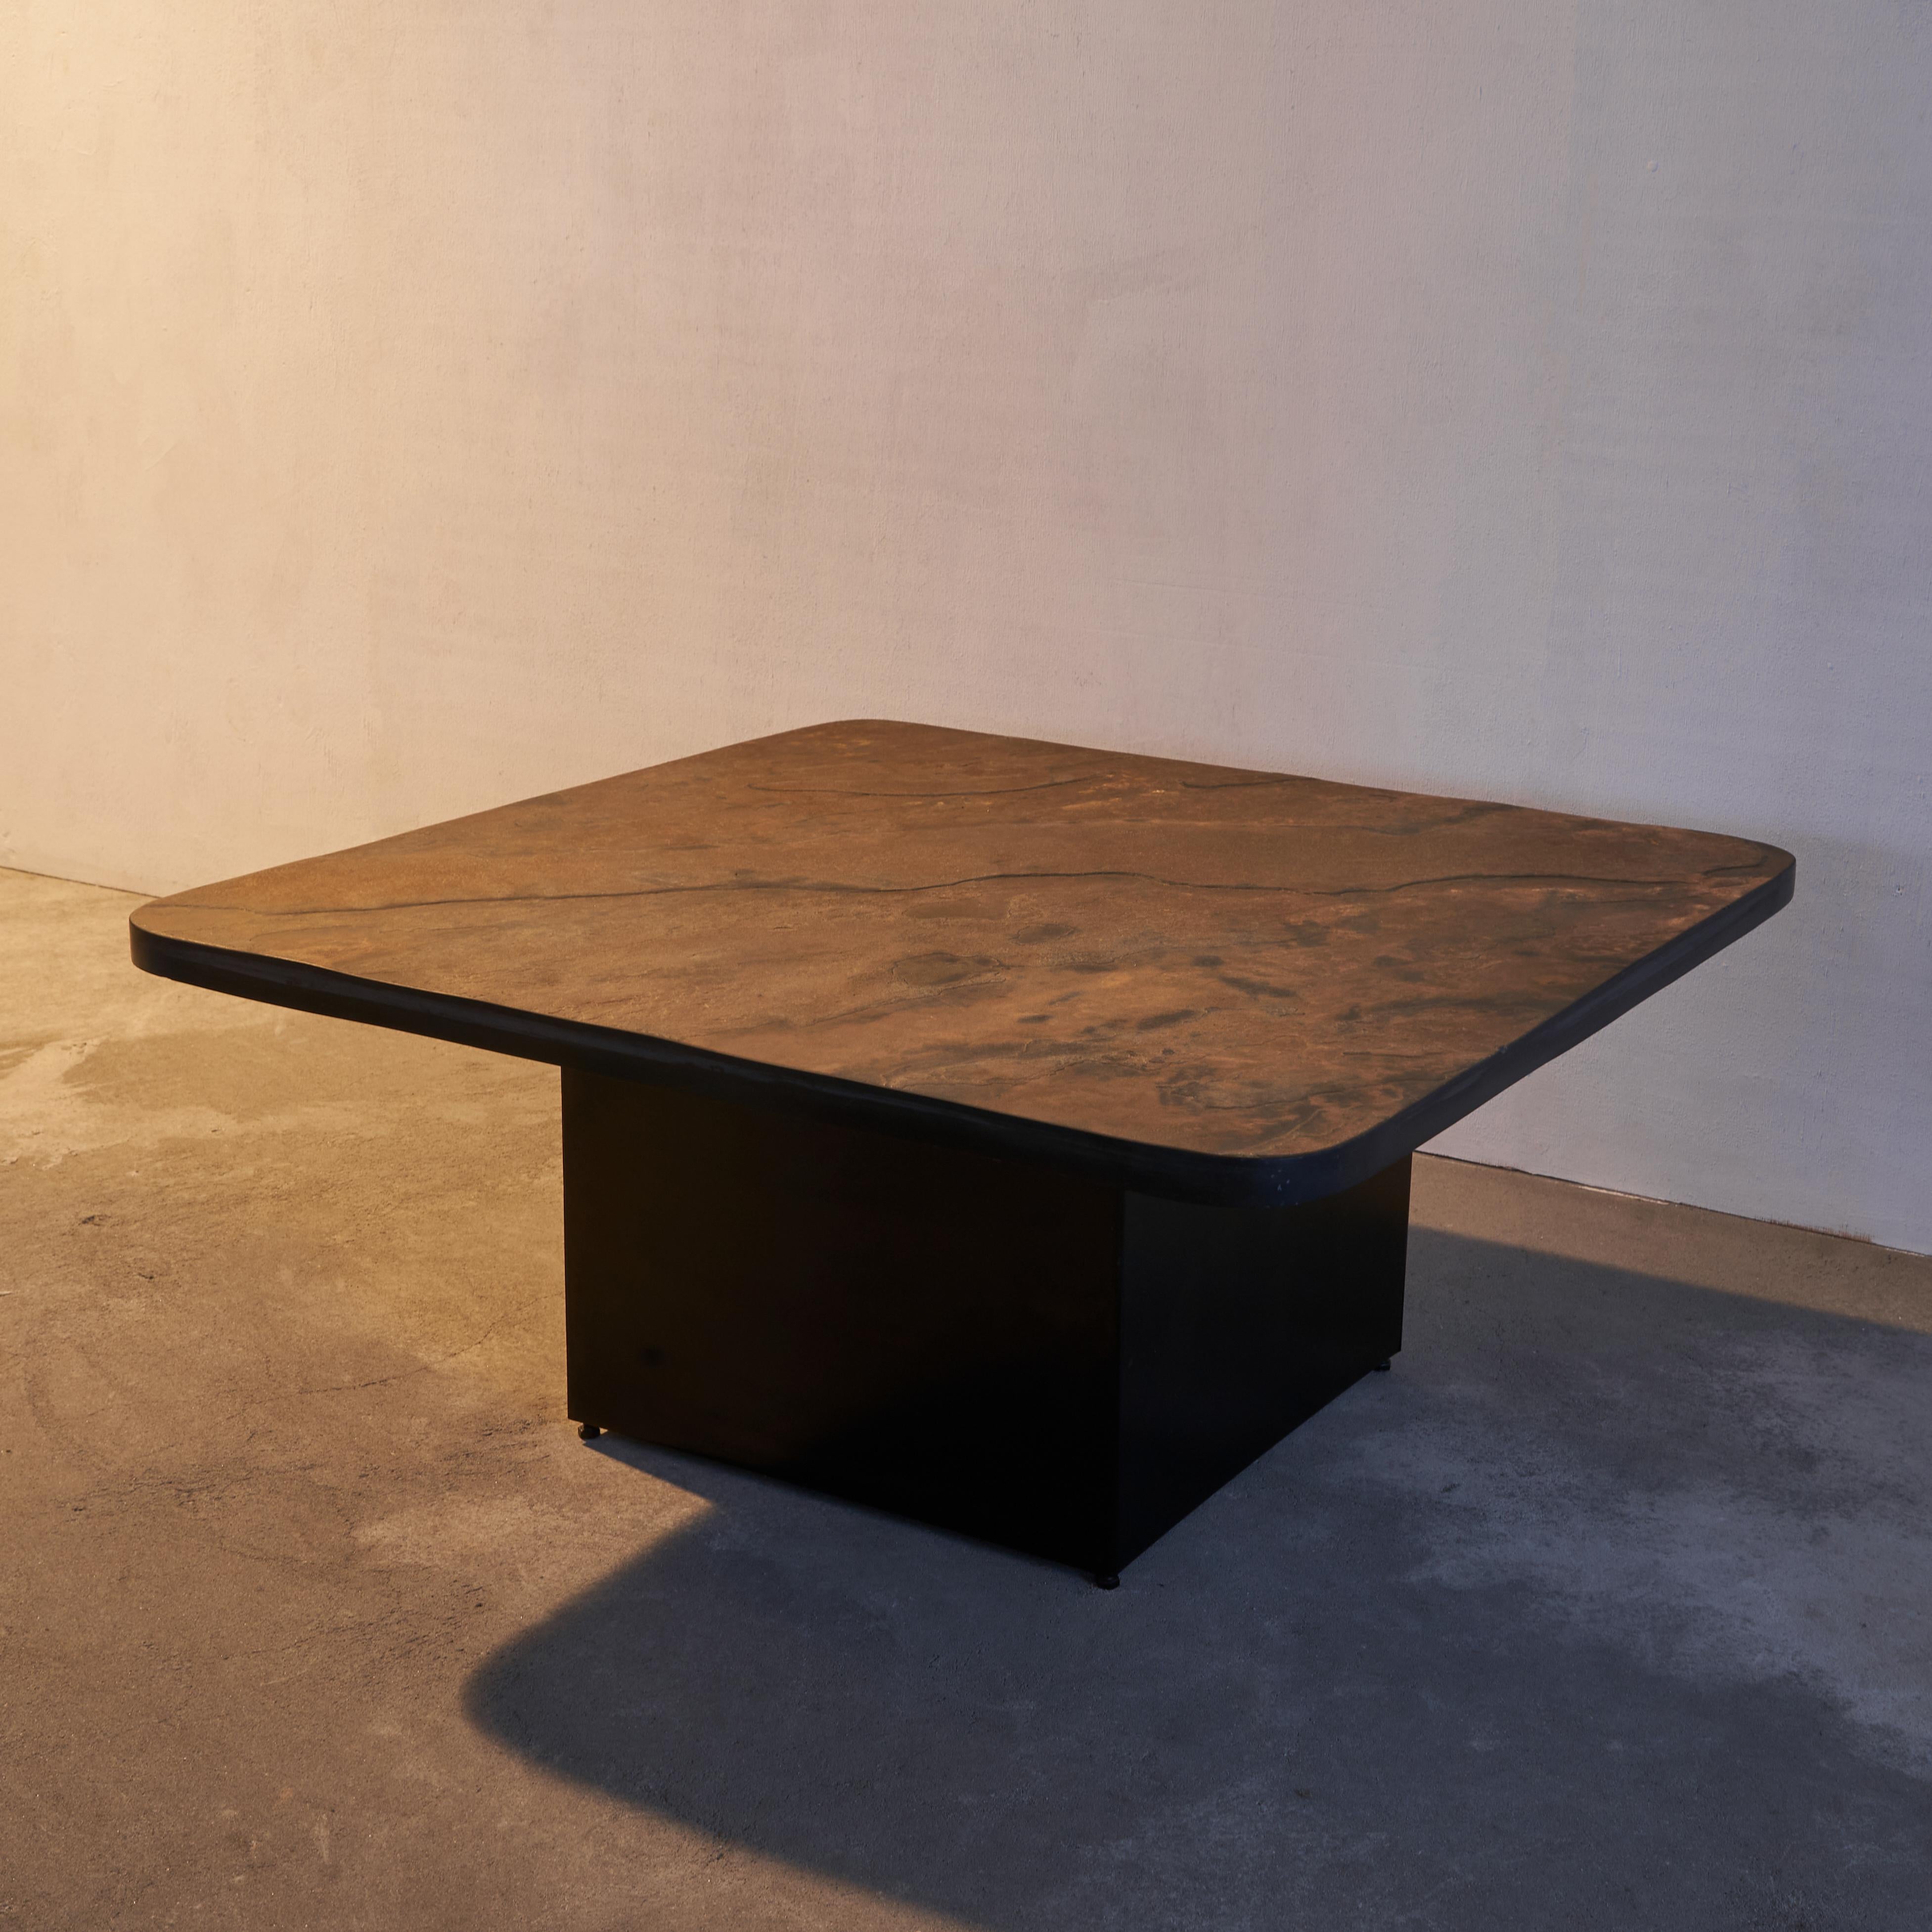 Early Paul Kingma stone coffee table, The Netherlands, 1960s.

Bought from the family of the first owner, this table is fresh to the market. The artist Paul Reiner Kingma (1931-2013) was a friend of the family and therefore this table has a strong